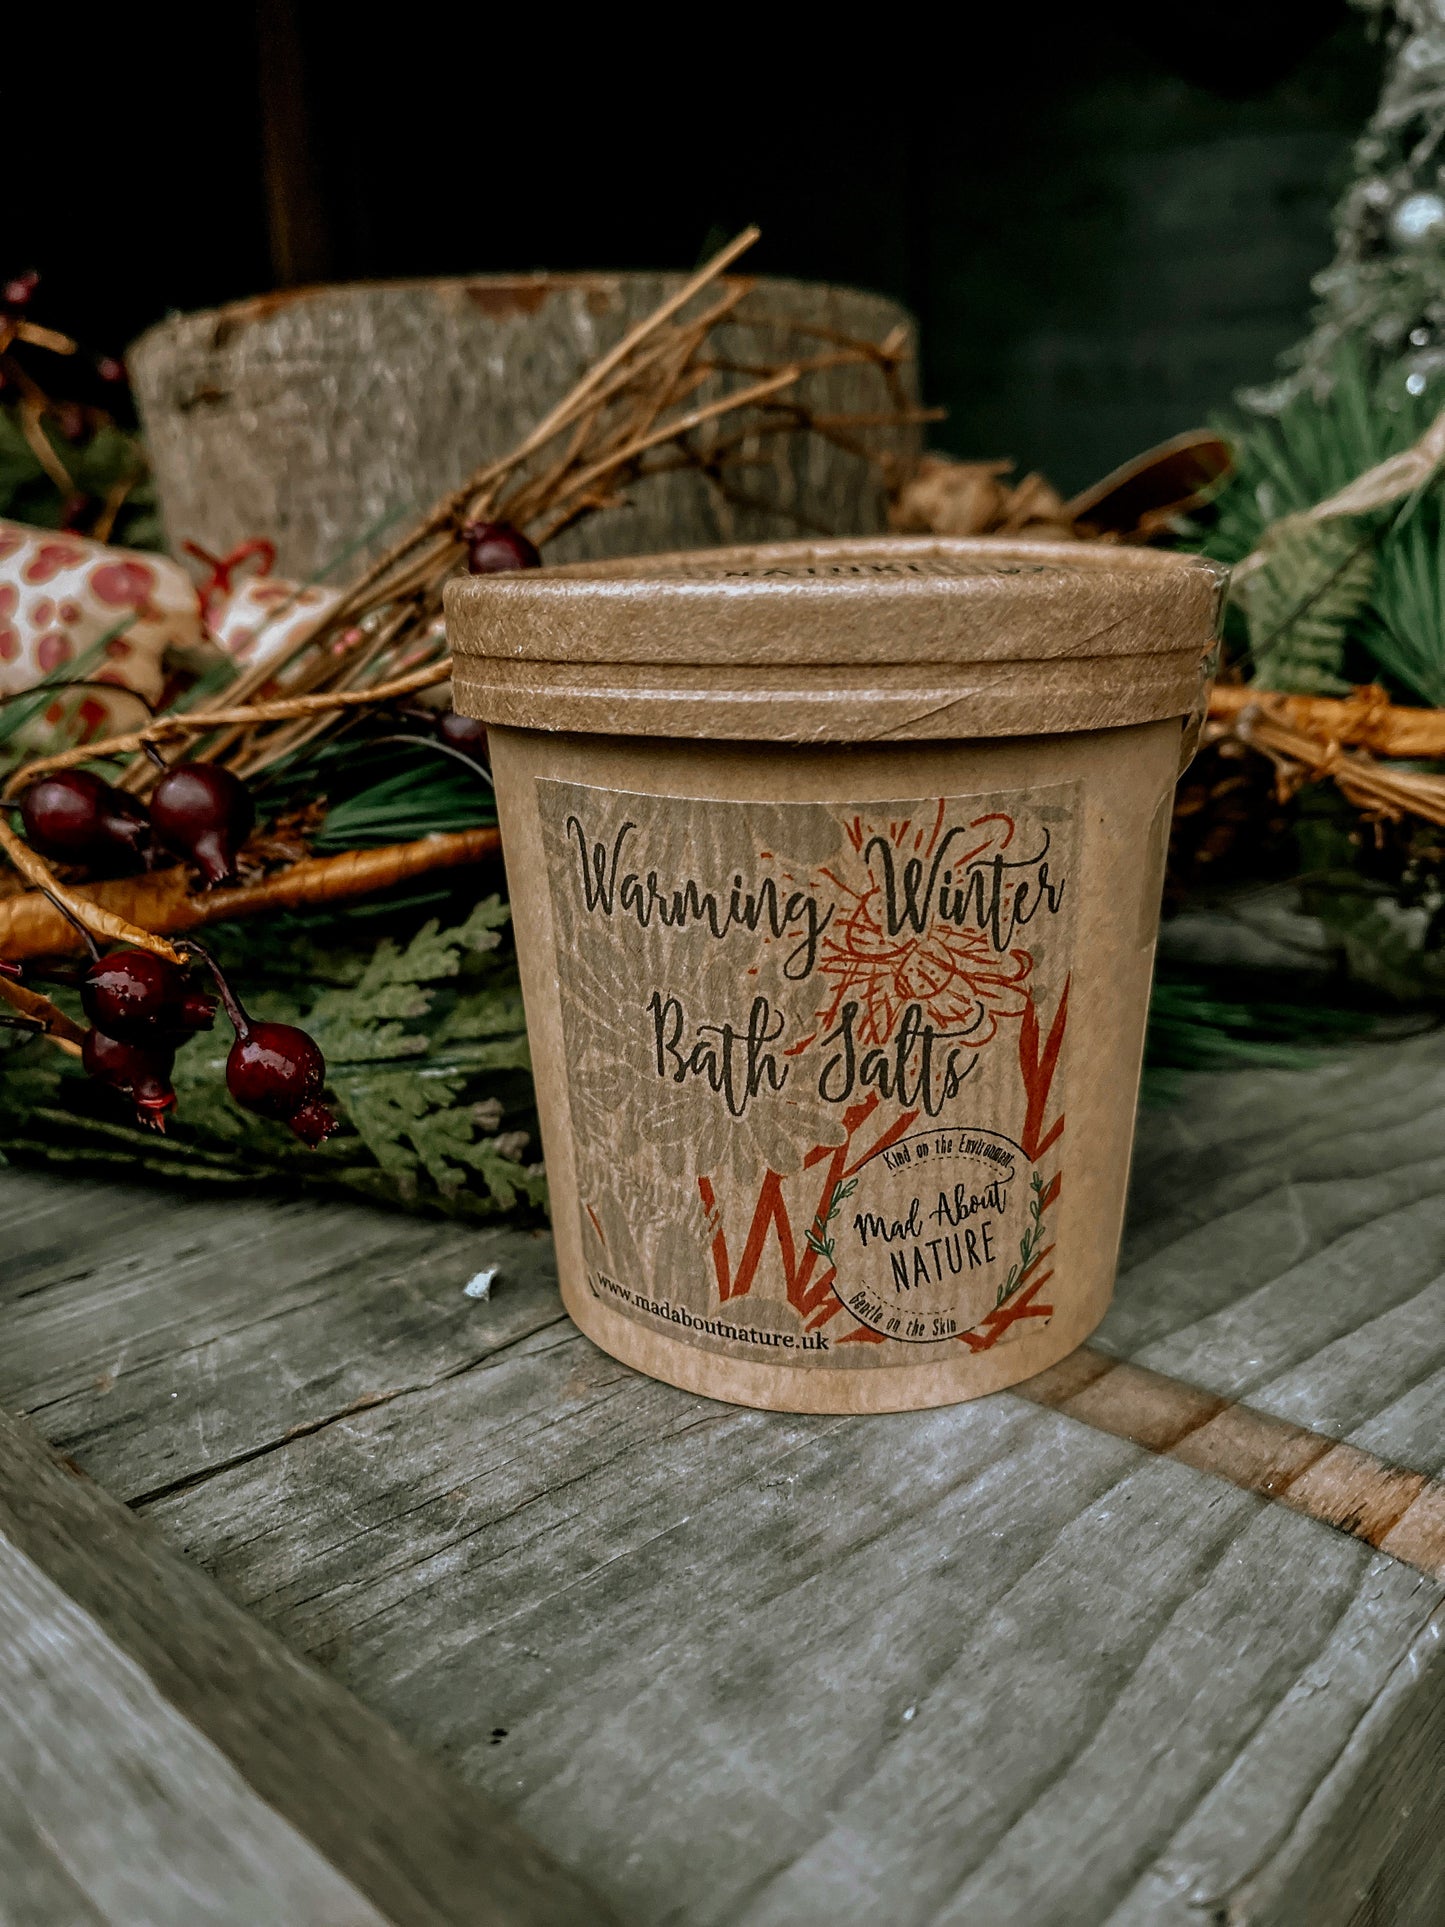 Mad About Nature Winter Warming Bath Salts